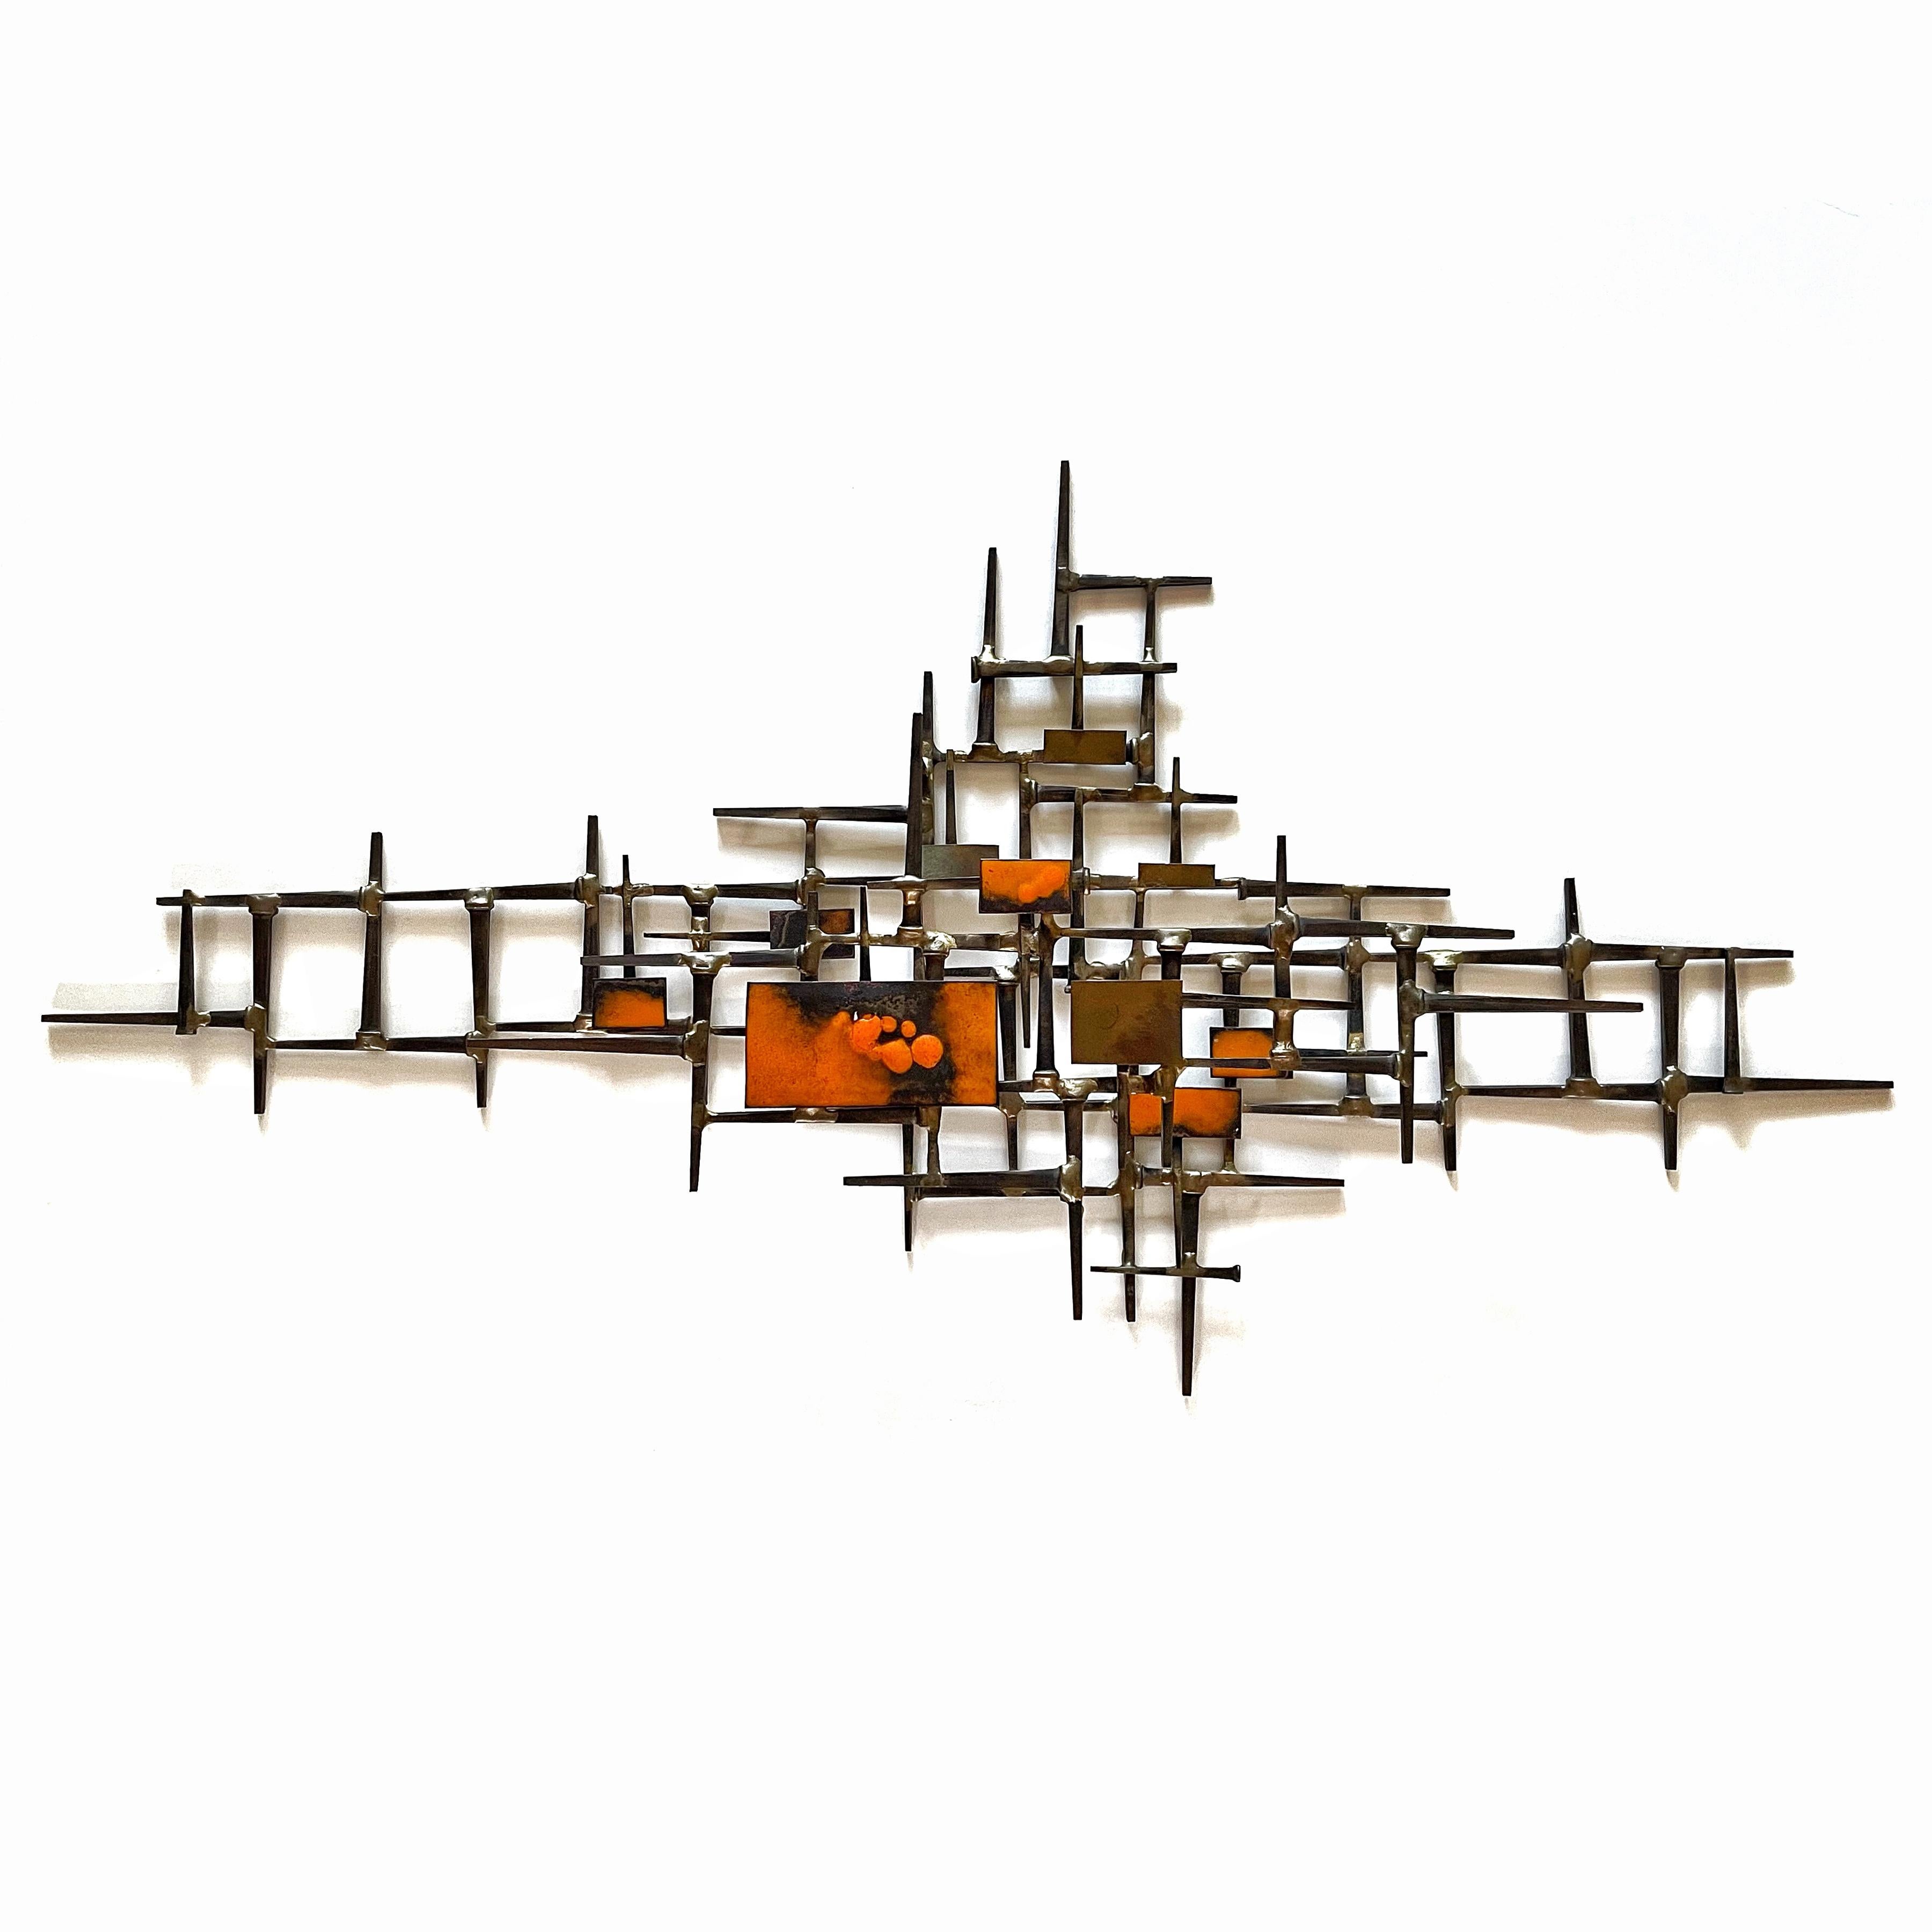 This terrific abstract sculpture has a wonderful linear composition created with iron brick nails welded with bronze and a patchwork of rectangles in enameled in vivid orange.

The piece looks great hung in any orientation.

18.5